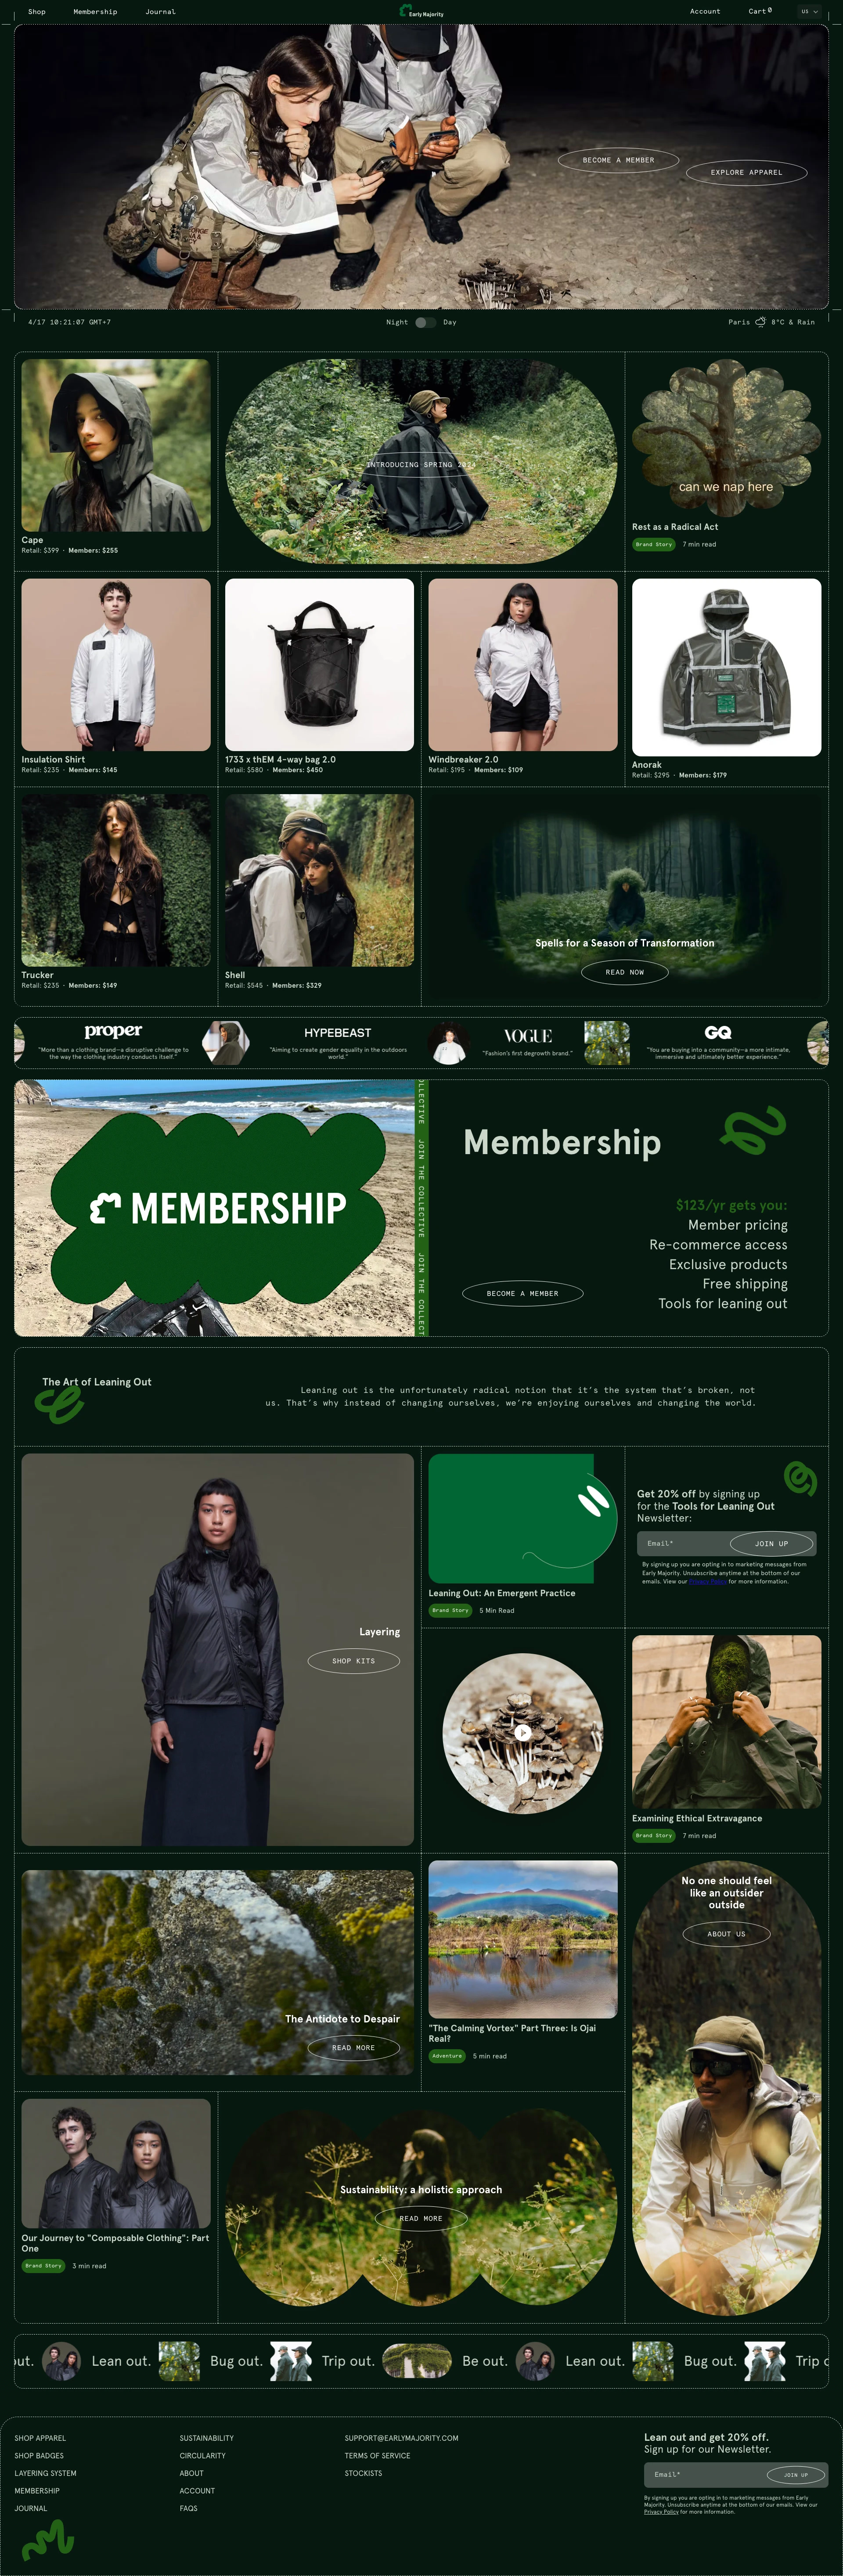 Early Majority Landing Page Example: Early Majority makes outdoor clothing for all eventualities. Our membership model reflects our commitment to systemic change and reduces environmental impact. Our community is based on sharing Tools for Leaning Out— resources and support for living a life fueled by art, adventure, and activism. Members have a voice in shaping our path as a company, which includes extending the life of your gear through circularity.